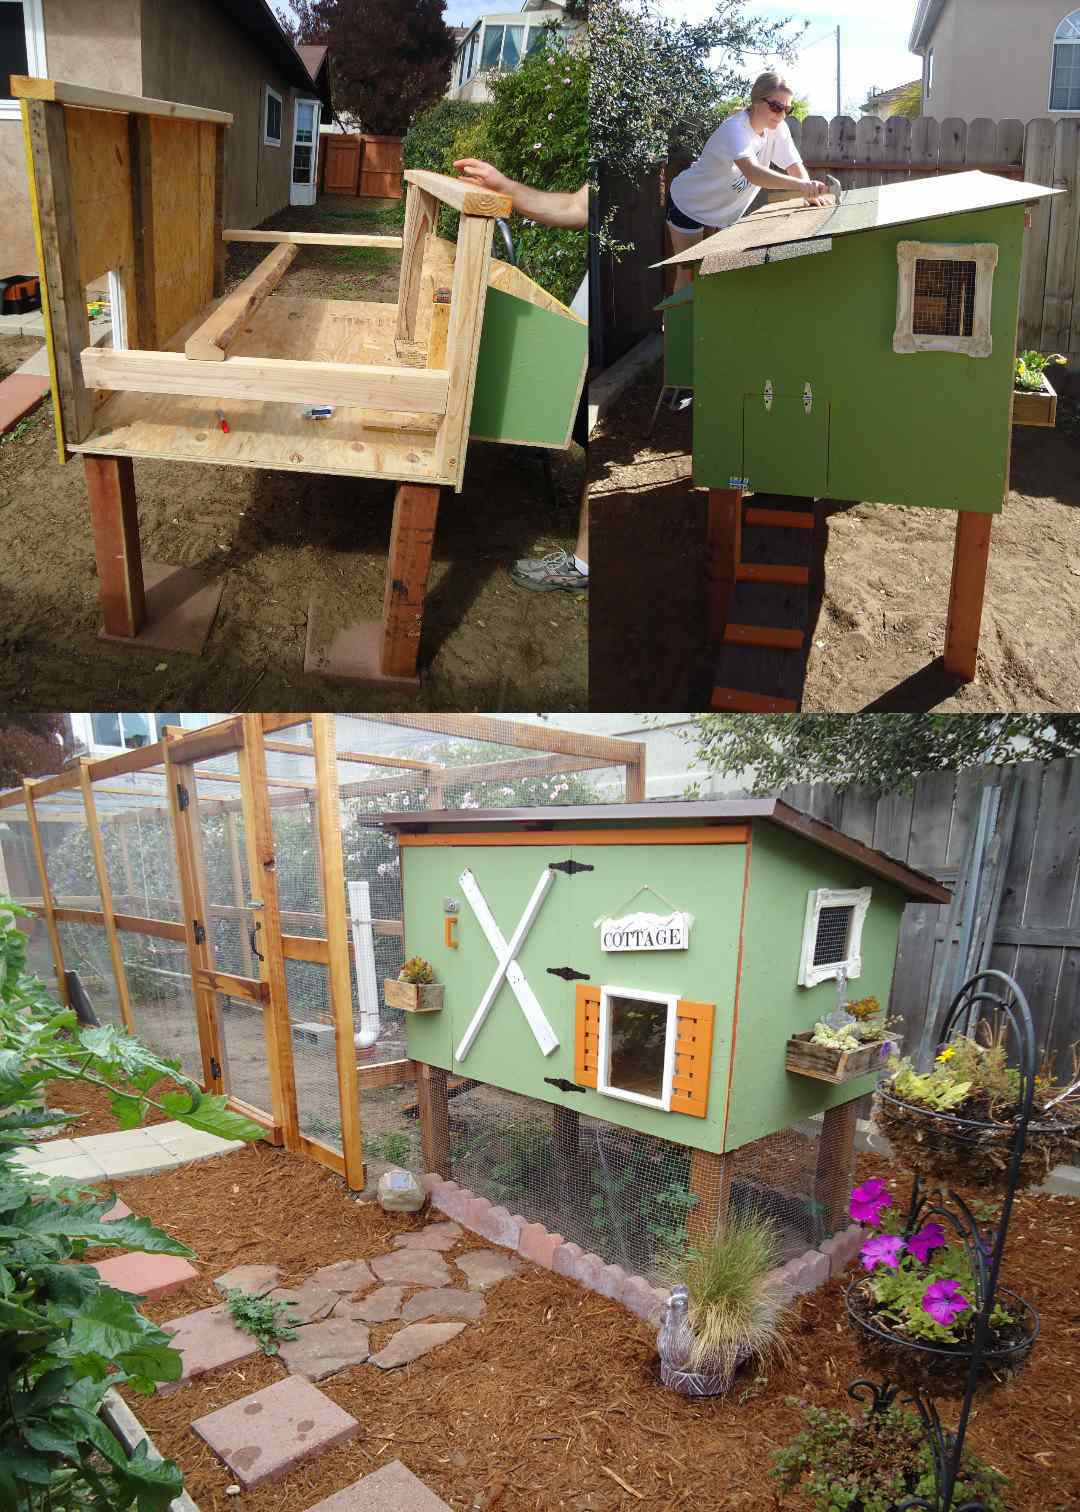 A three part image collage, the first image shows the chicken coop n mid construction. There is a plywood floor with a plywood side and nest boxes hanging off of one end. There are 2x4's running along each side in different directions for support of the structure. There are 4x4's protruding out of the bottom of the coop which are the legs and feet of the coop. The second image shows DeannaCat on a small step ladder nailing roof shingles to the top of the  chicken coop roof. The third image shows the coop and run once fully complete, there is hardware cloth predator proofing lining the run and underneath of the coop.  